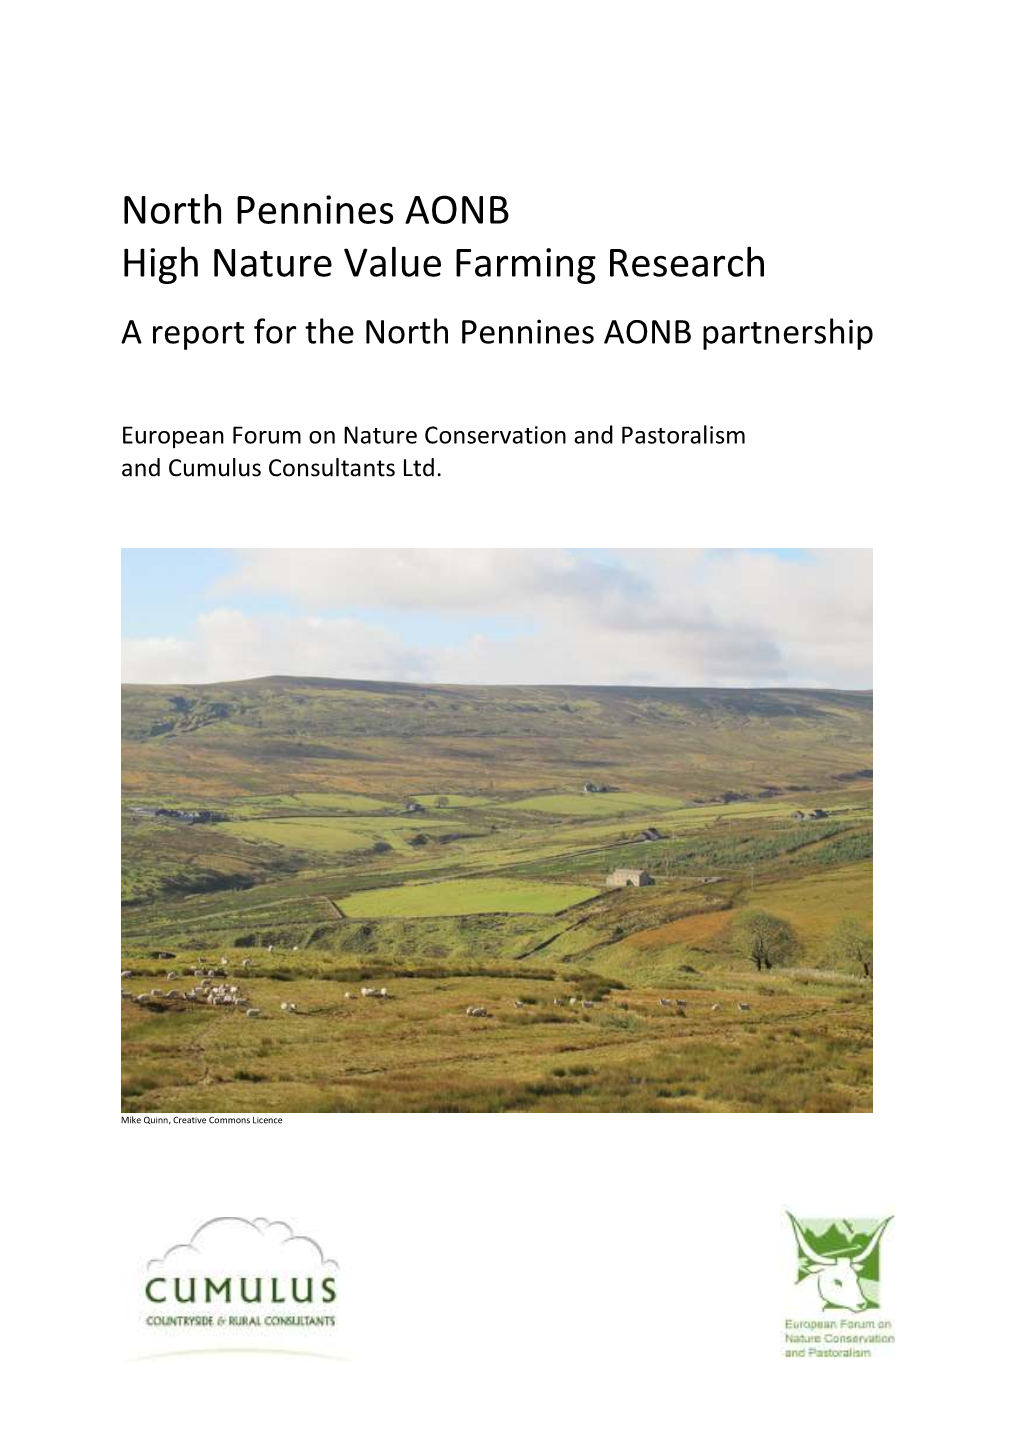 North Pennines AONB High Nature Value Farming Research